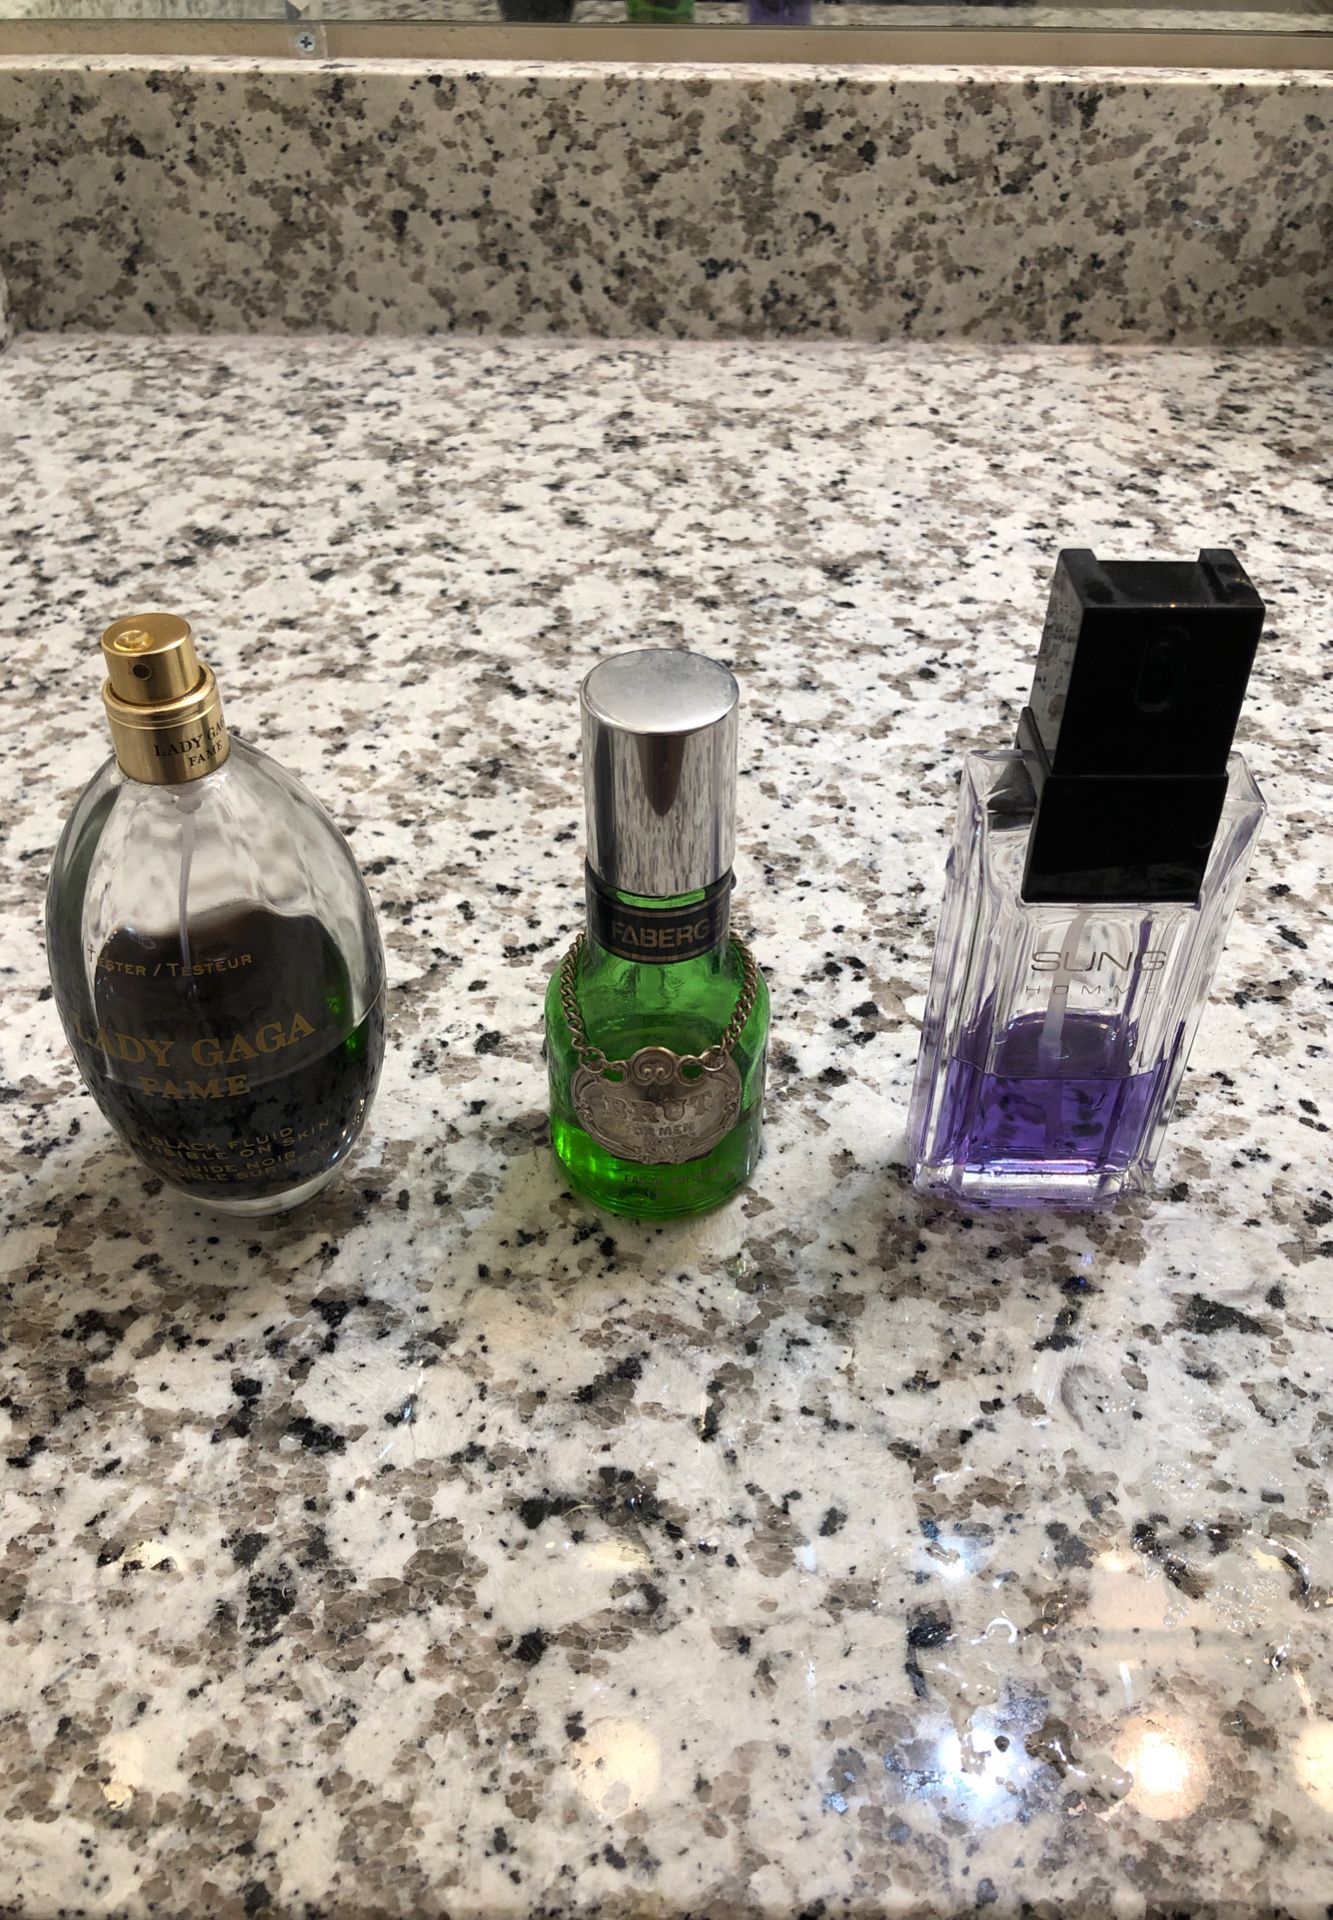 Three assorted men’s cologne